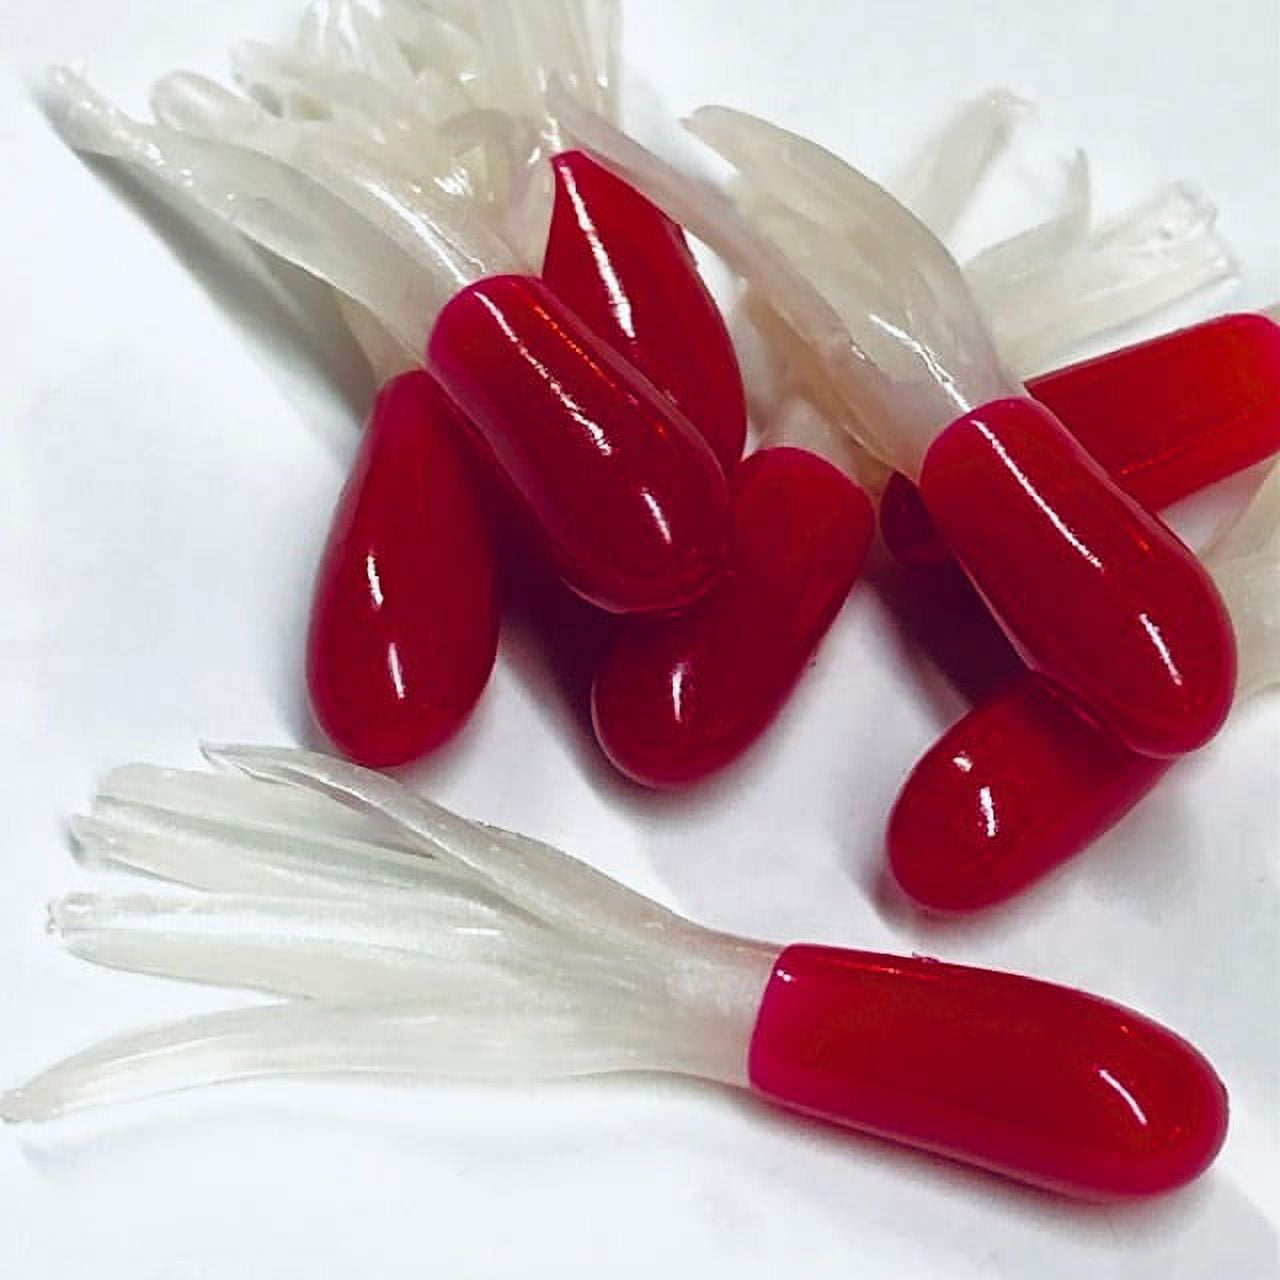 1.5 Original Crappie Tube Lures 50 Pack Red/White